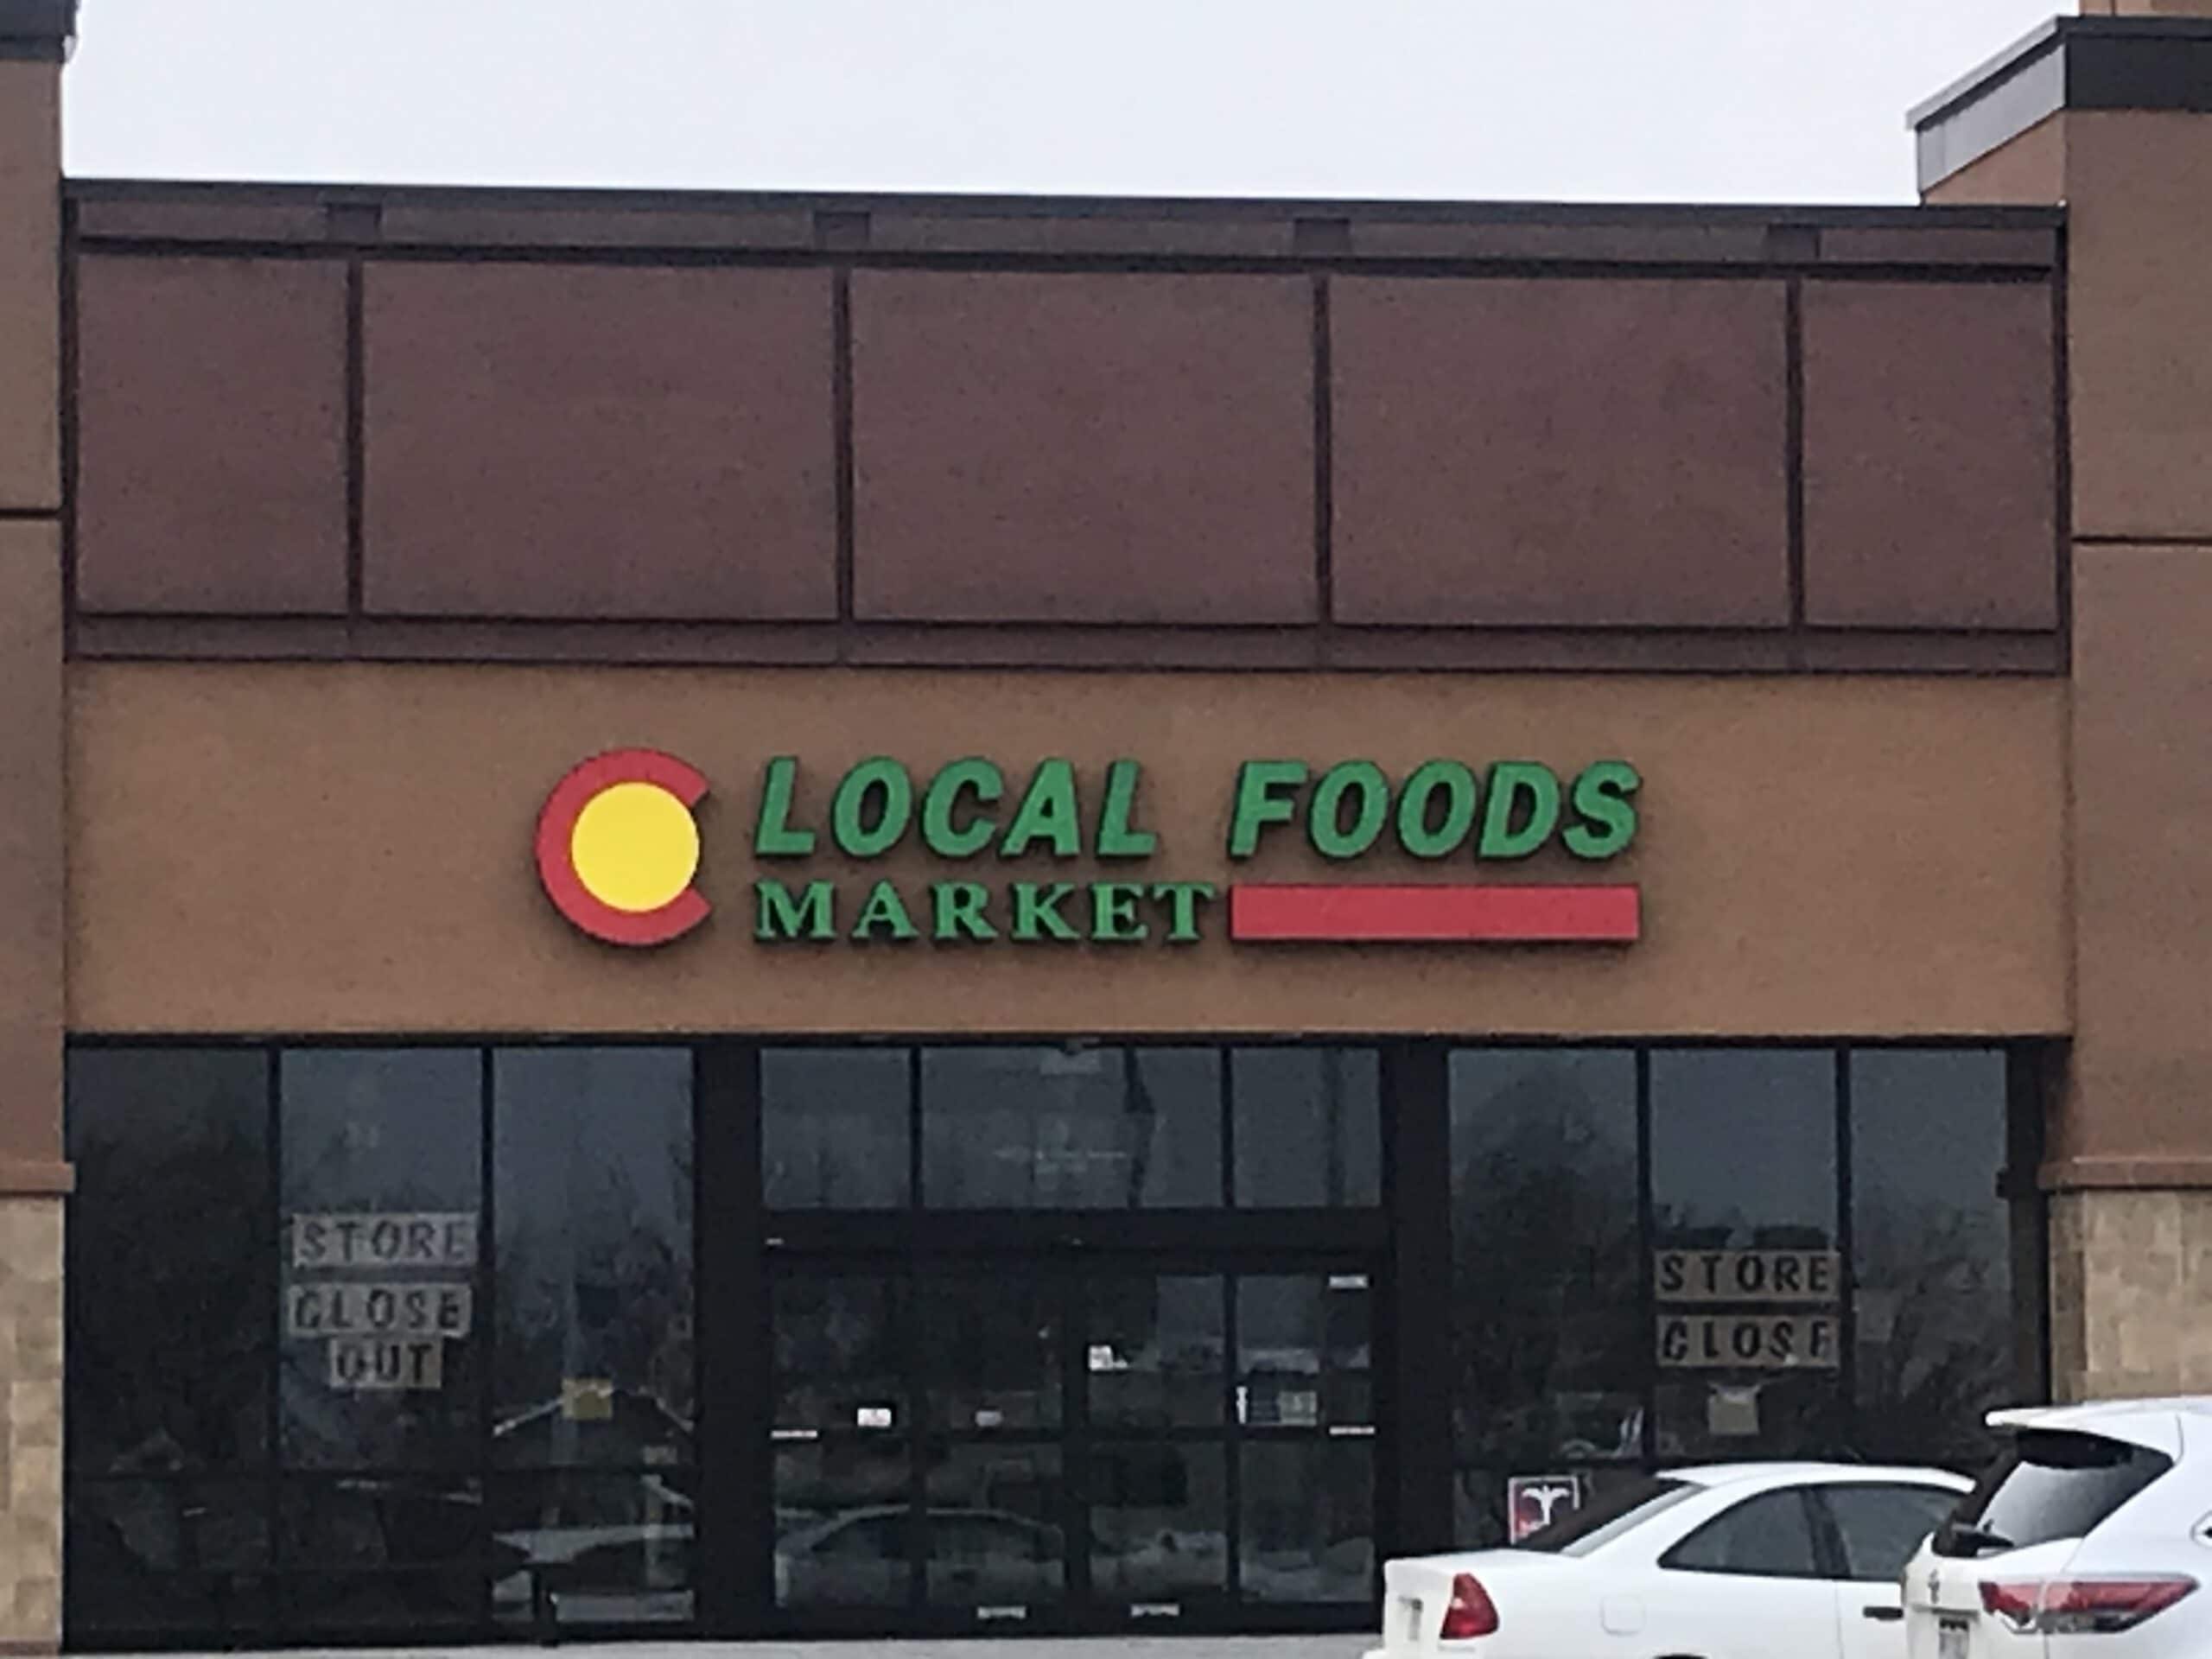 Local Foods Market Channel Letter Sign